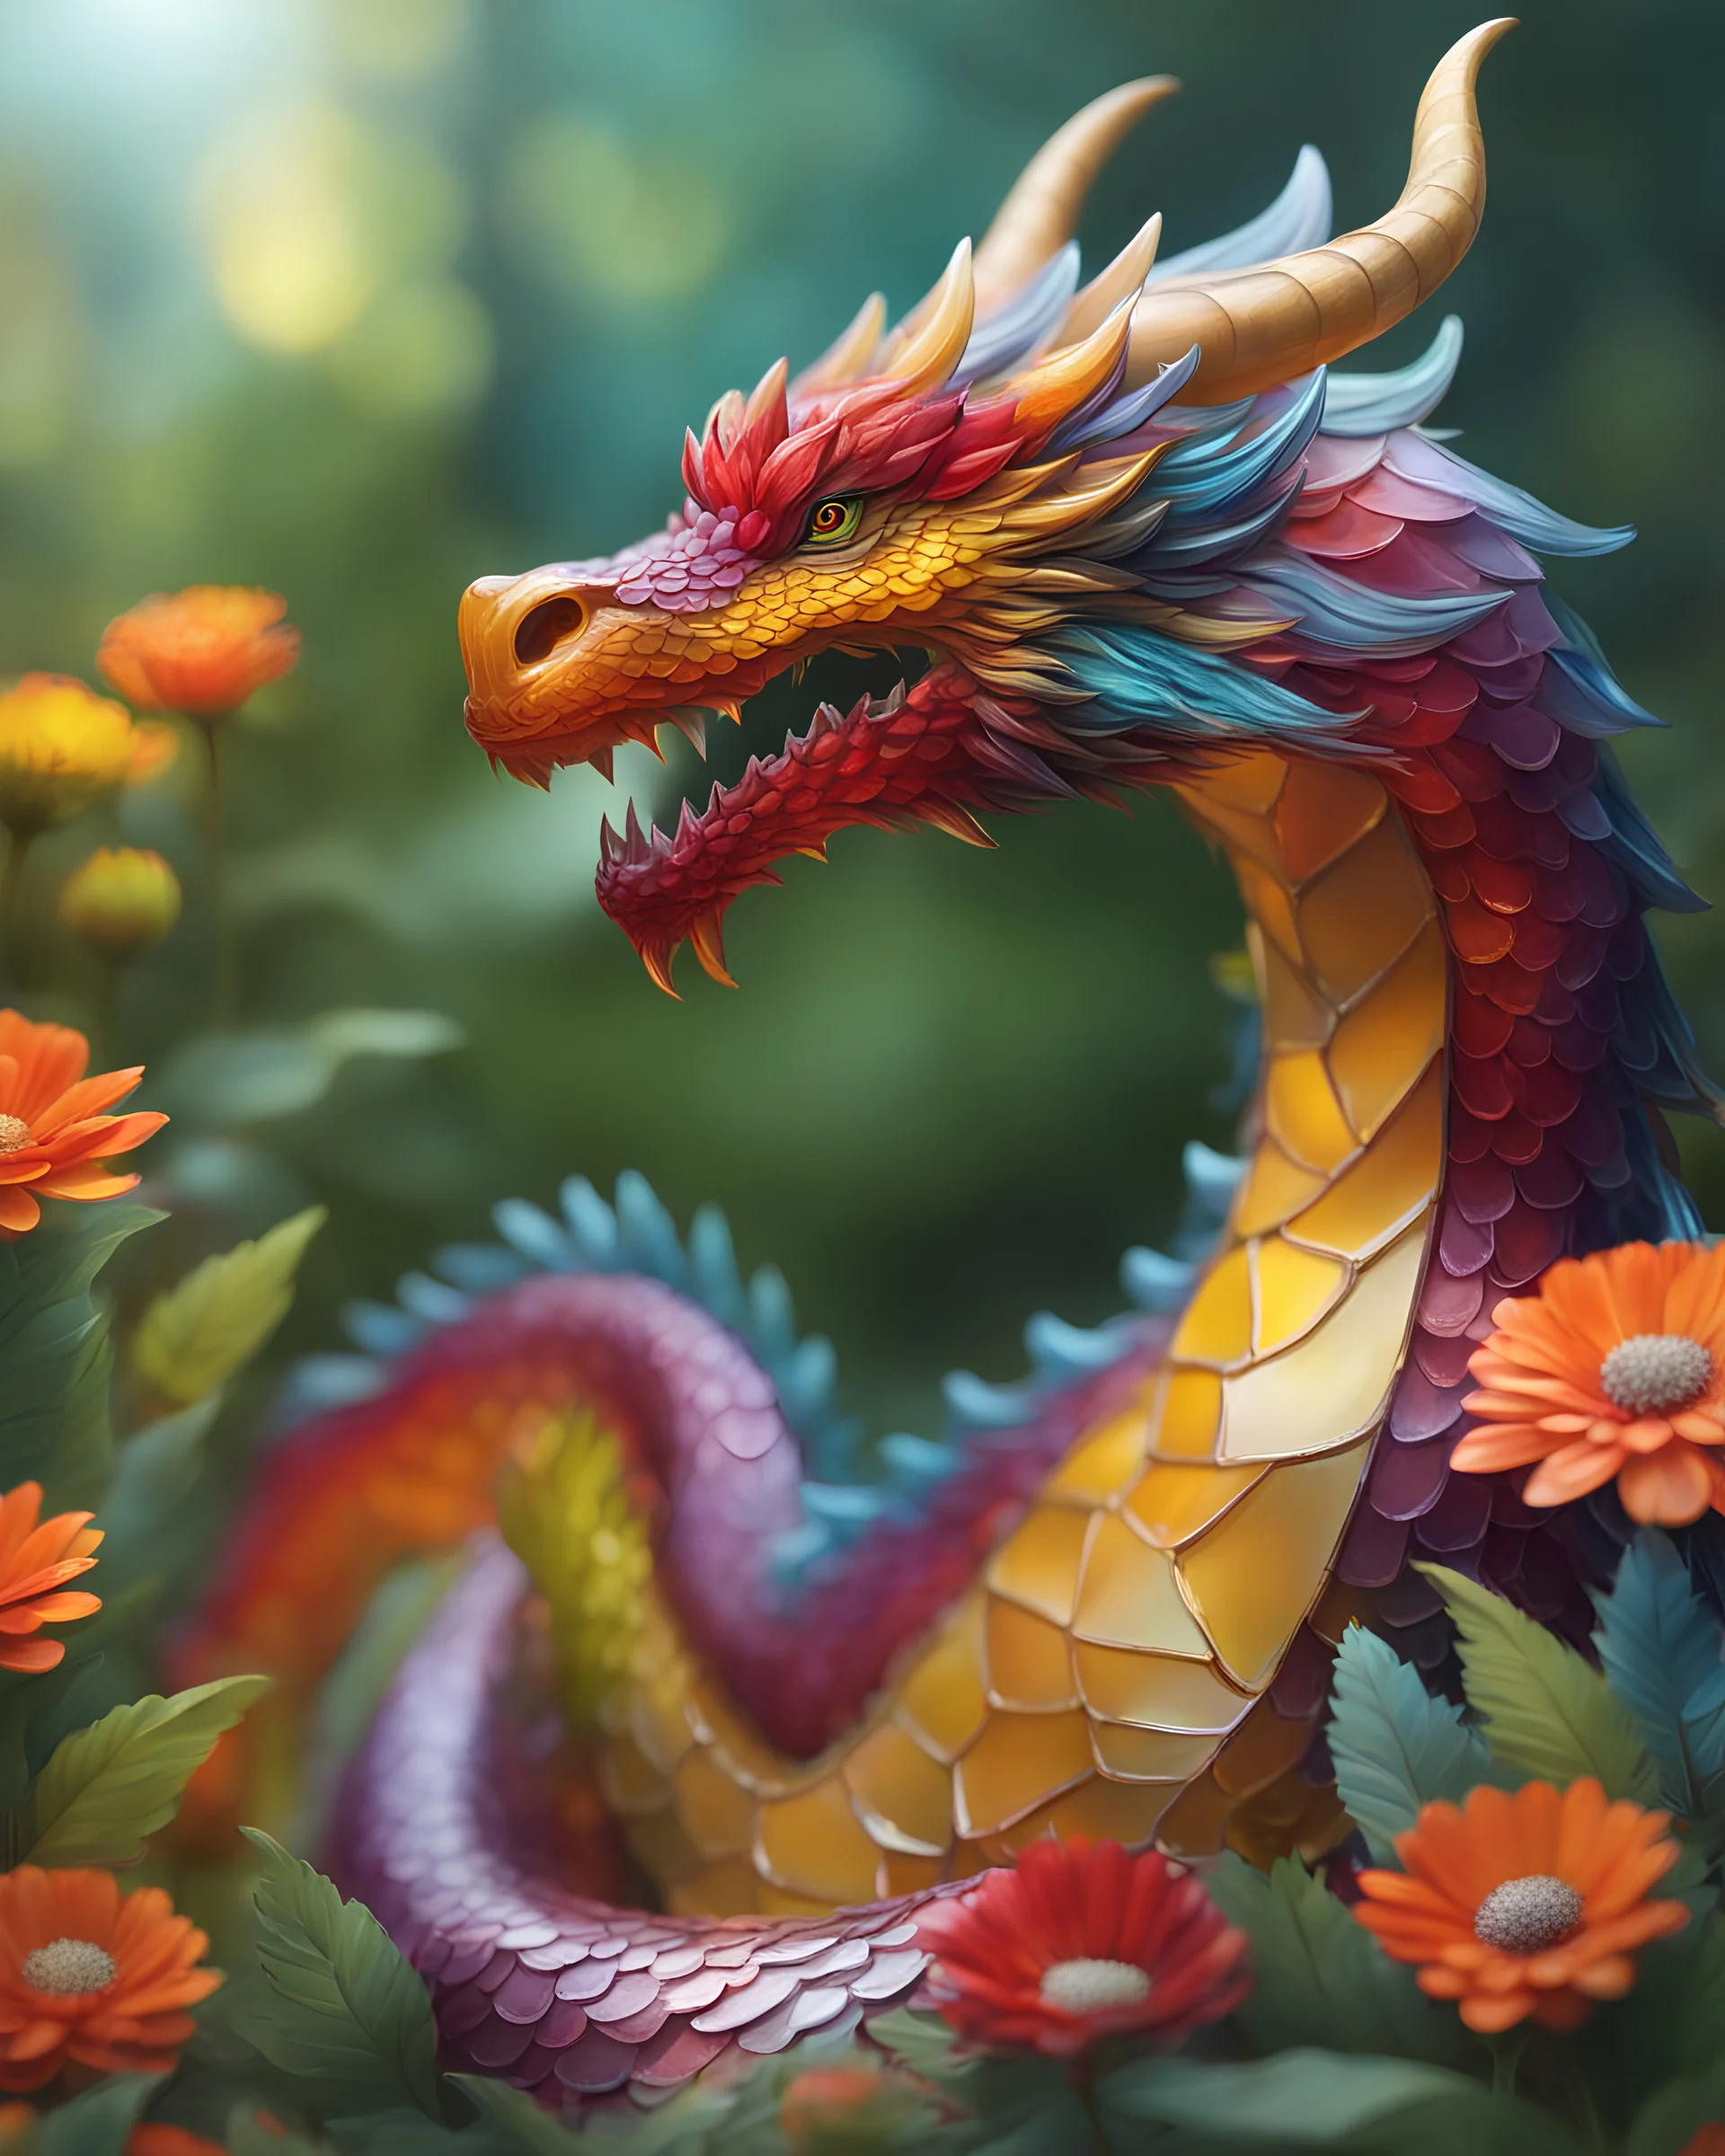 llustration of a dragon made of glass, full body shot, vivid color, depth of field, bright forest of colorful flowers